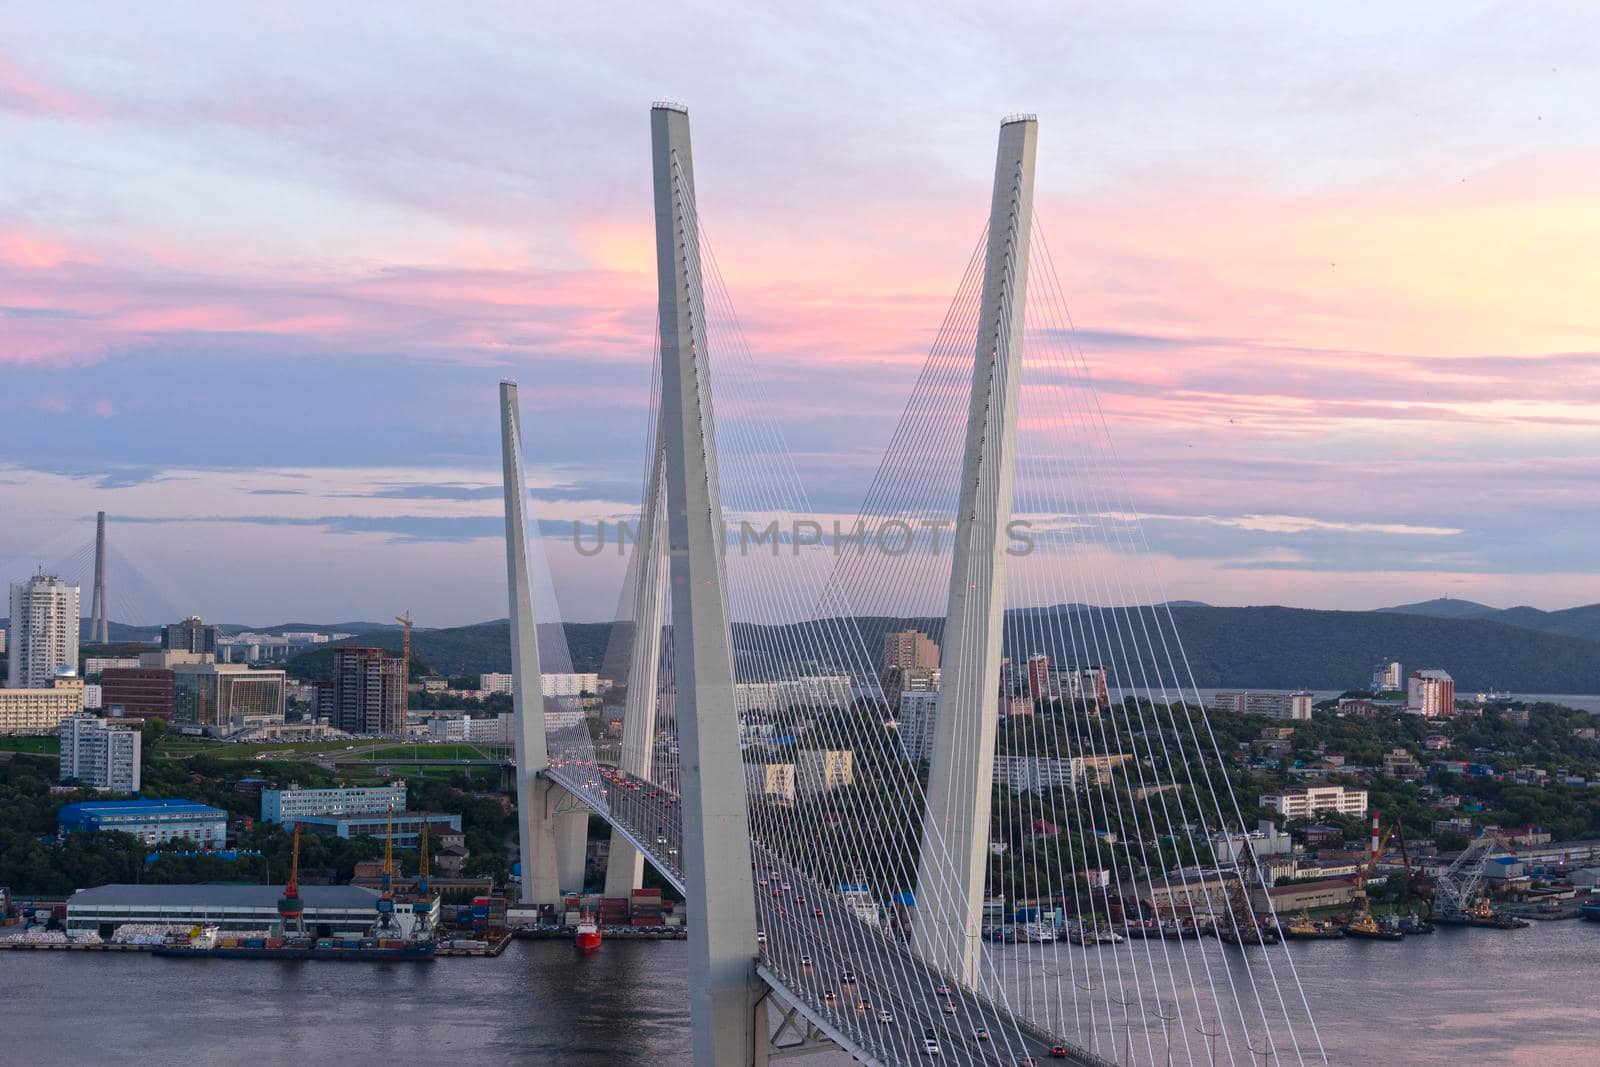 Urban landscape with a view of the Golden Bridge at sunset. Vladivostok, Russia.